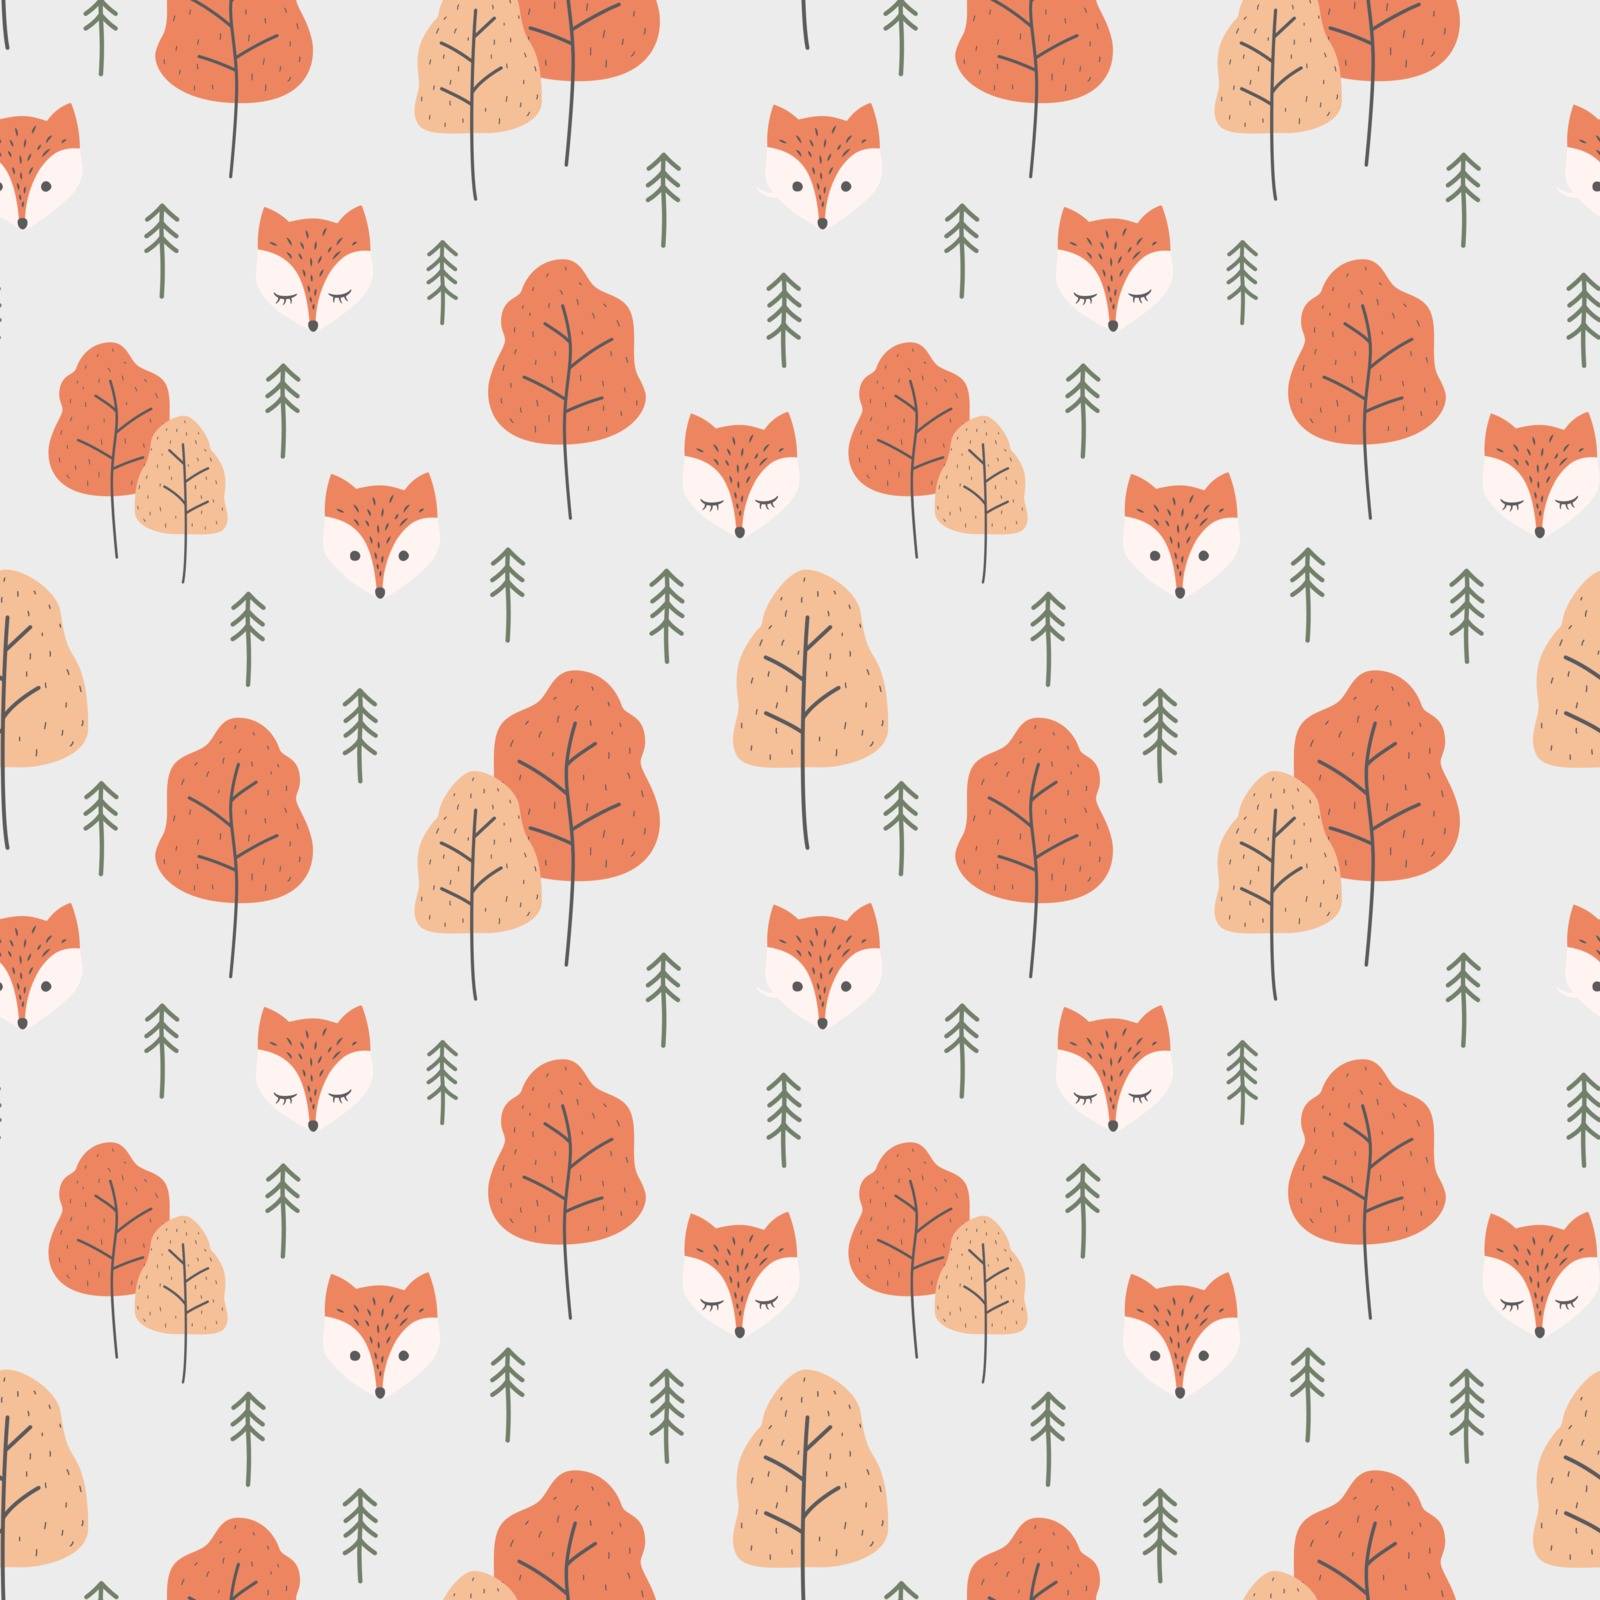 Autumn pattern design with fox and trees, orange and red color